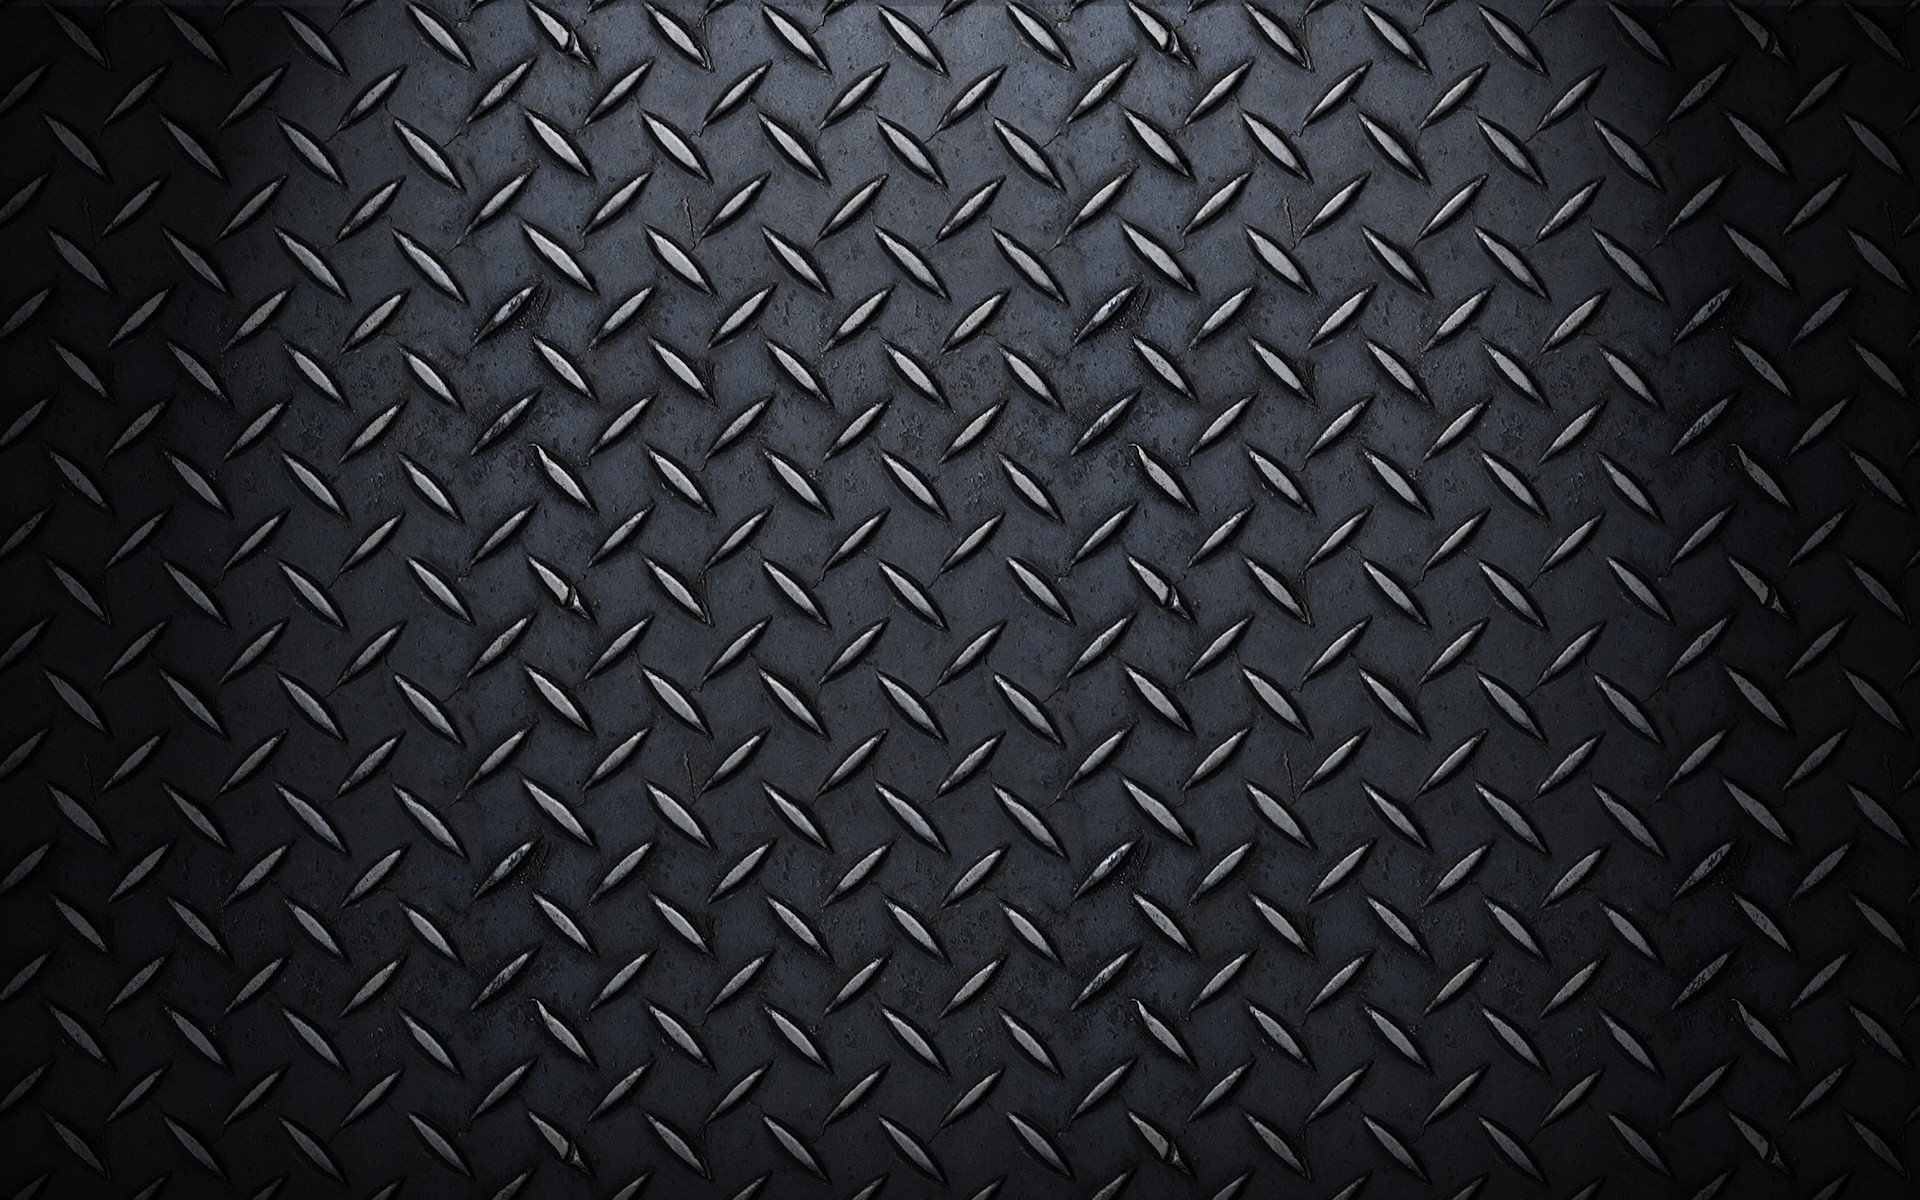 Carbon Fiber Pattern Photoshop Wallpaper Carbon Fiber Texture Wallpaper Android Iphone 5 Ipad S3 Hd S4 Free Note 2 Shanken Security Solutions